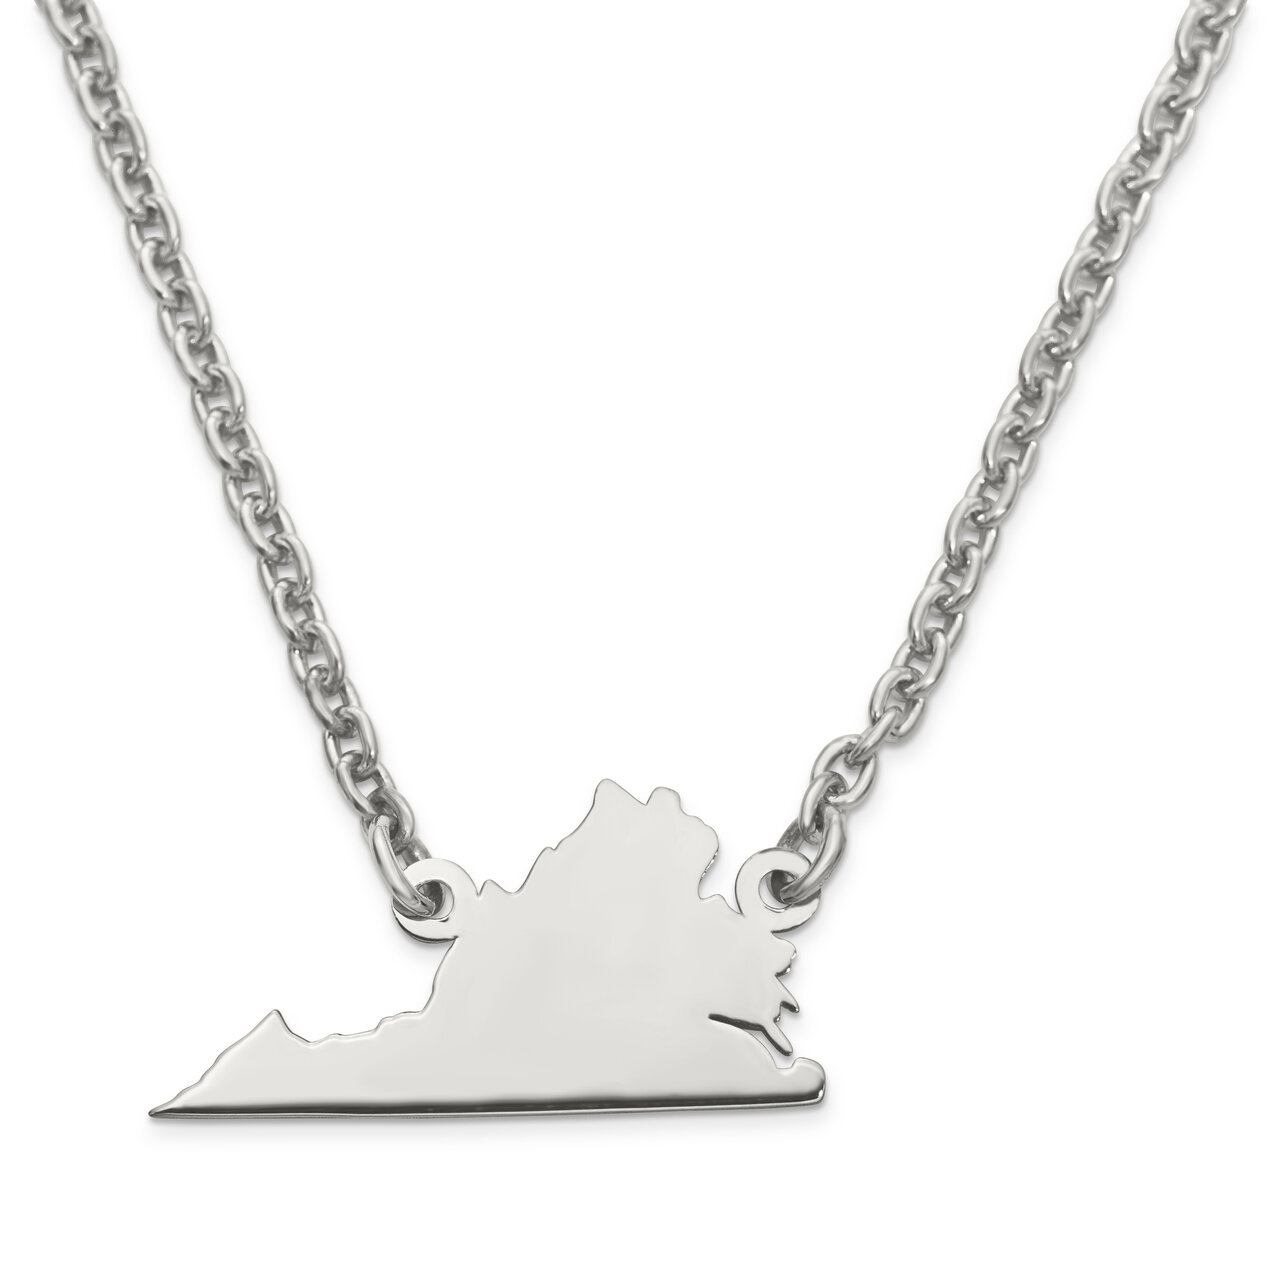 Virginia State Pendant Necklace with Chain 14k White Gold Engravable XNA706W-VA